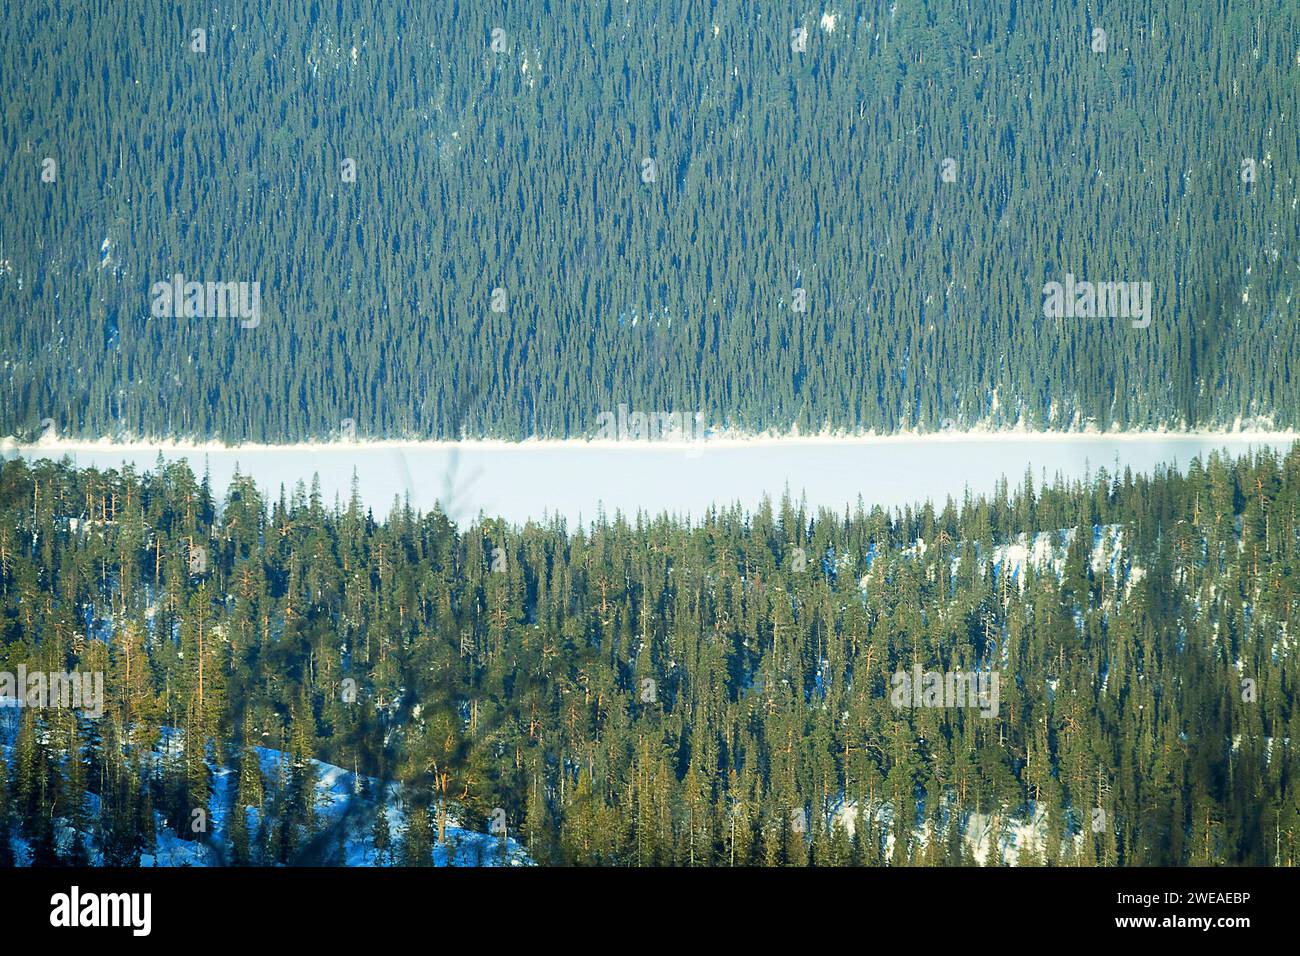 Boreal zone, bitterly cold. Coniferous forests of Canada, USA, Russia are largest terrestrial habitat (biotope) in world - taiga extends for thousands Stock Photo